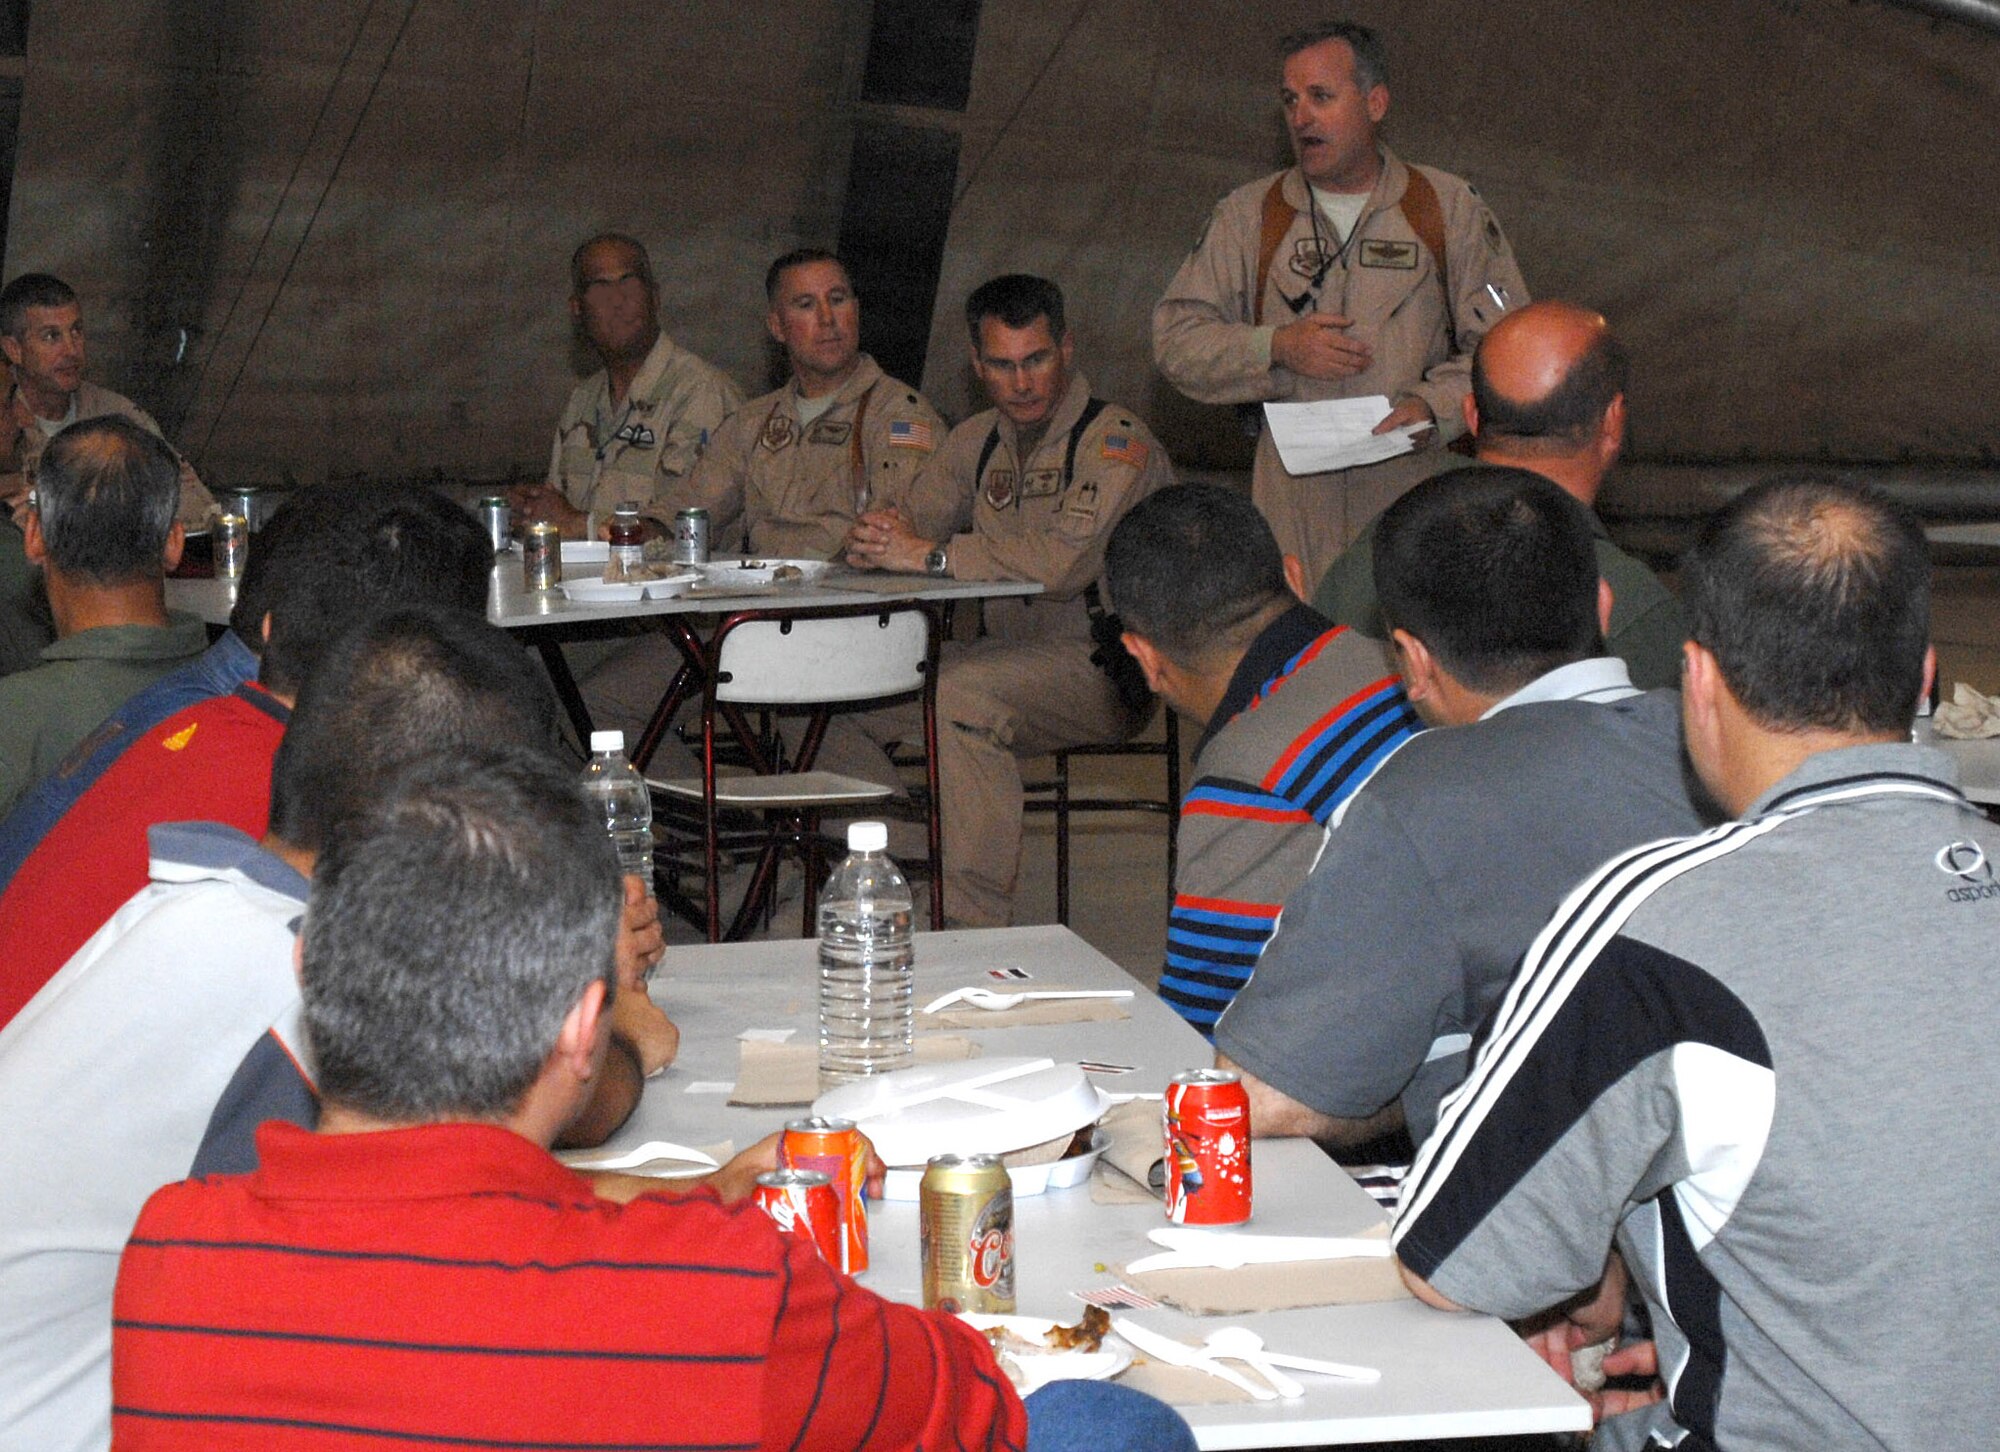 Lt. Col. James Adamski, 52nd Expeditionary Flying Training Squadron instructor pilot, addresses the crowd of a recent Order of Daedalians meeting here. The event marked the first Daedalian meeting that Iraqi pilots were invited to participate. Most of the U.S. pilots who attended the meeting are assigned to the Coalition Air Forces Training Team - an organization dedicated to training Iraqi airmen at their flying training wing here. (U.S. Air Force Graphic Illustration by Senior Master Sgt. Don Senger)